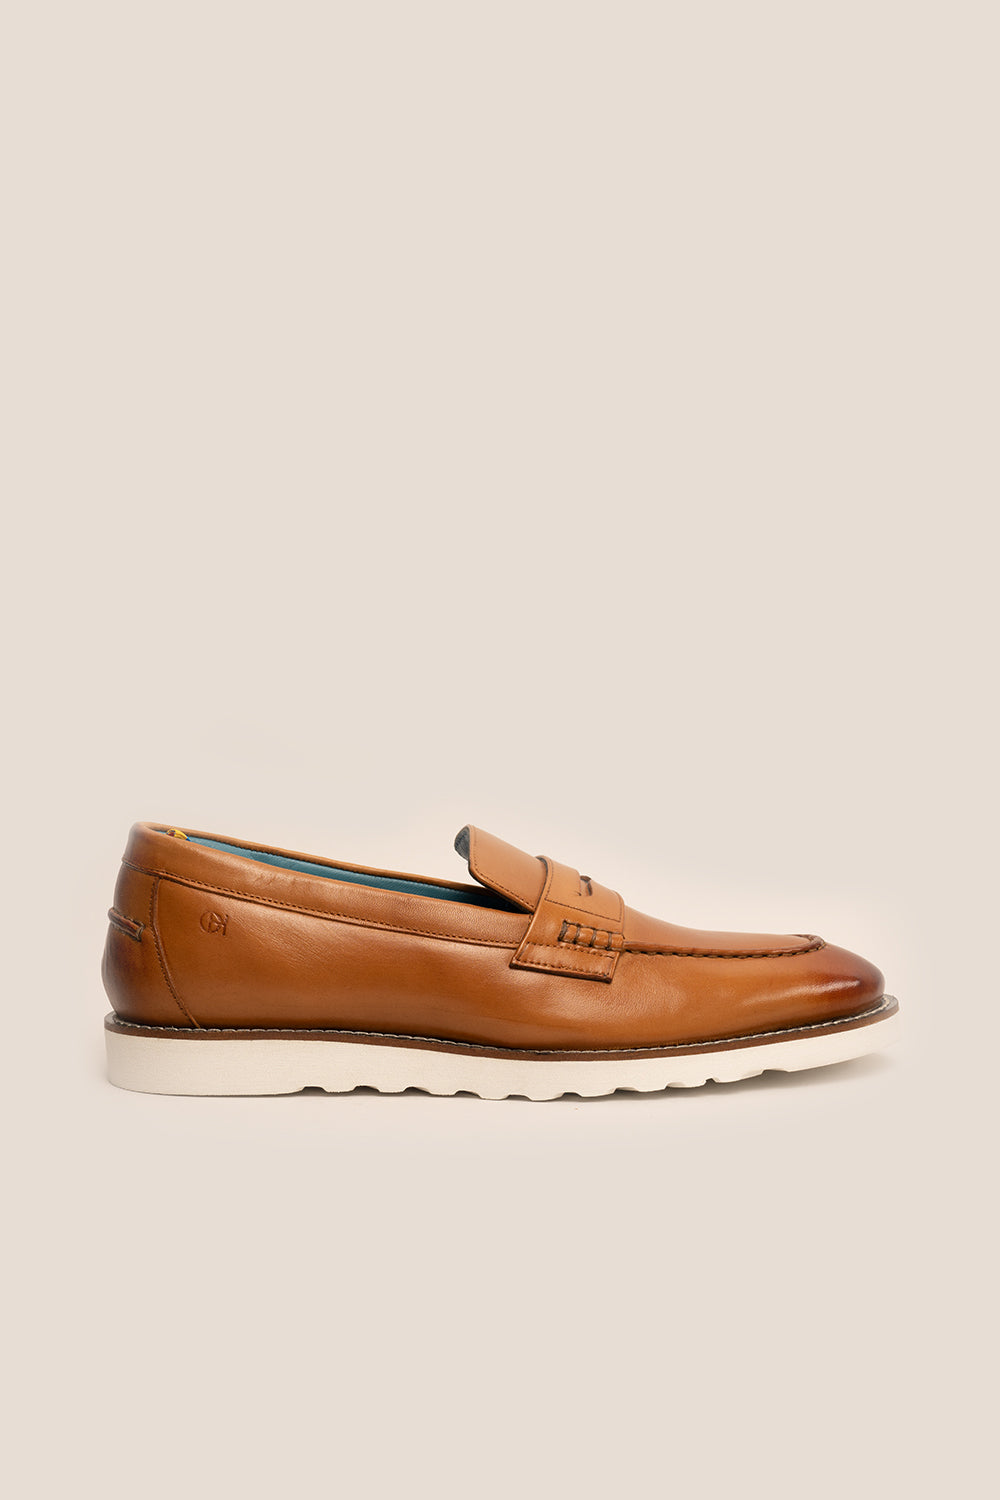 Mens Tan Leather Loafers Oswin Hyde